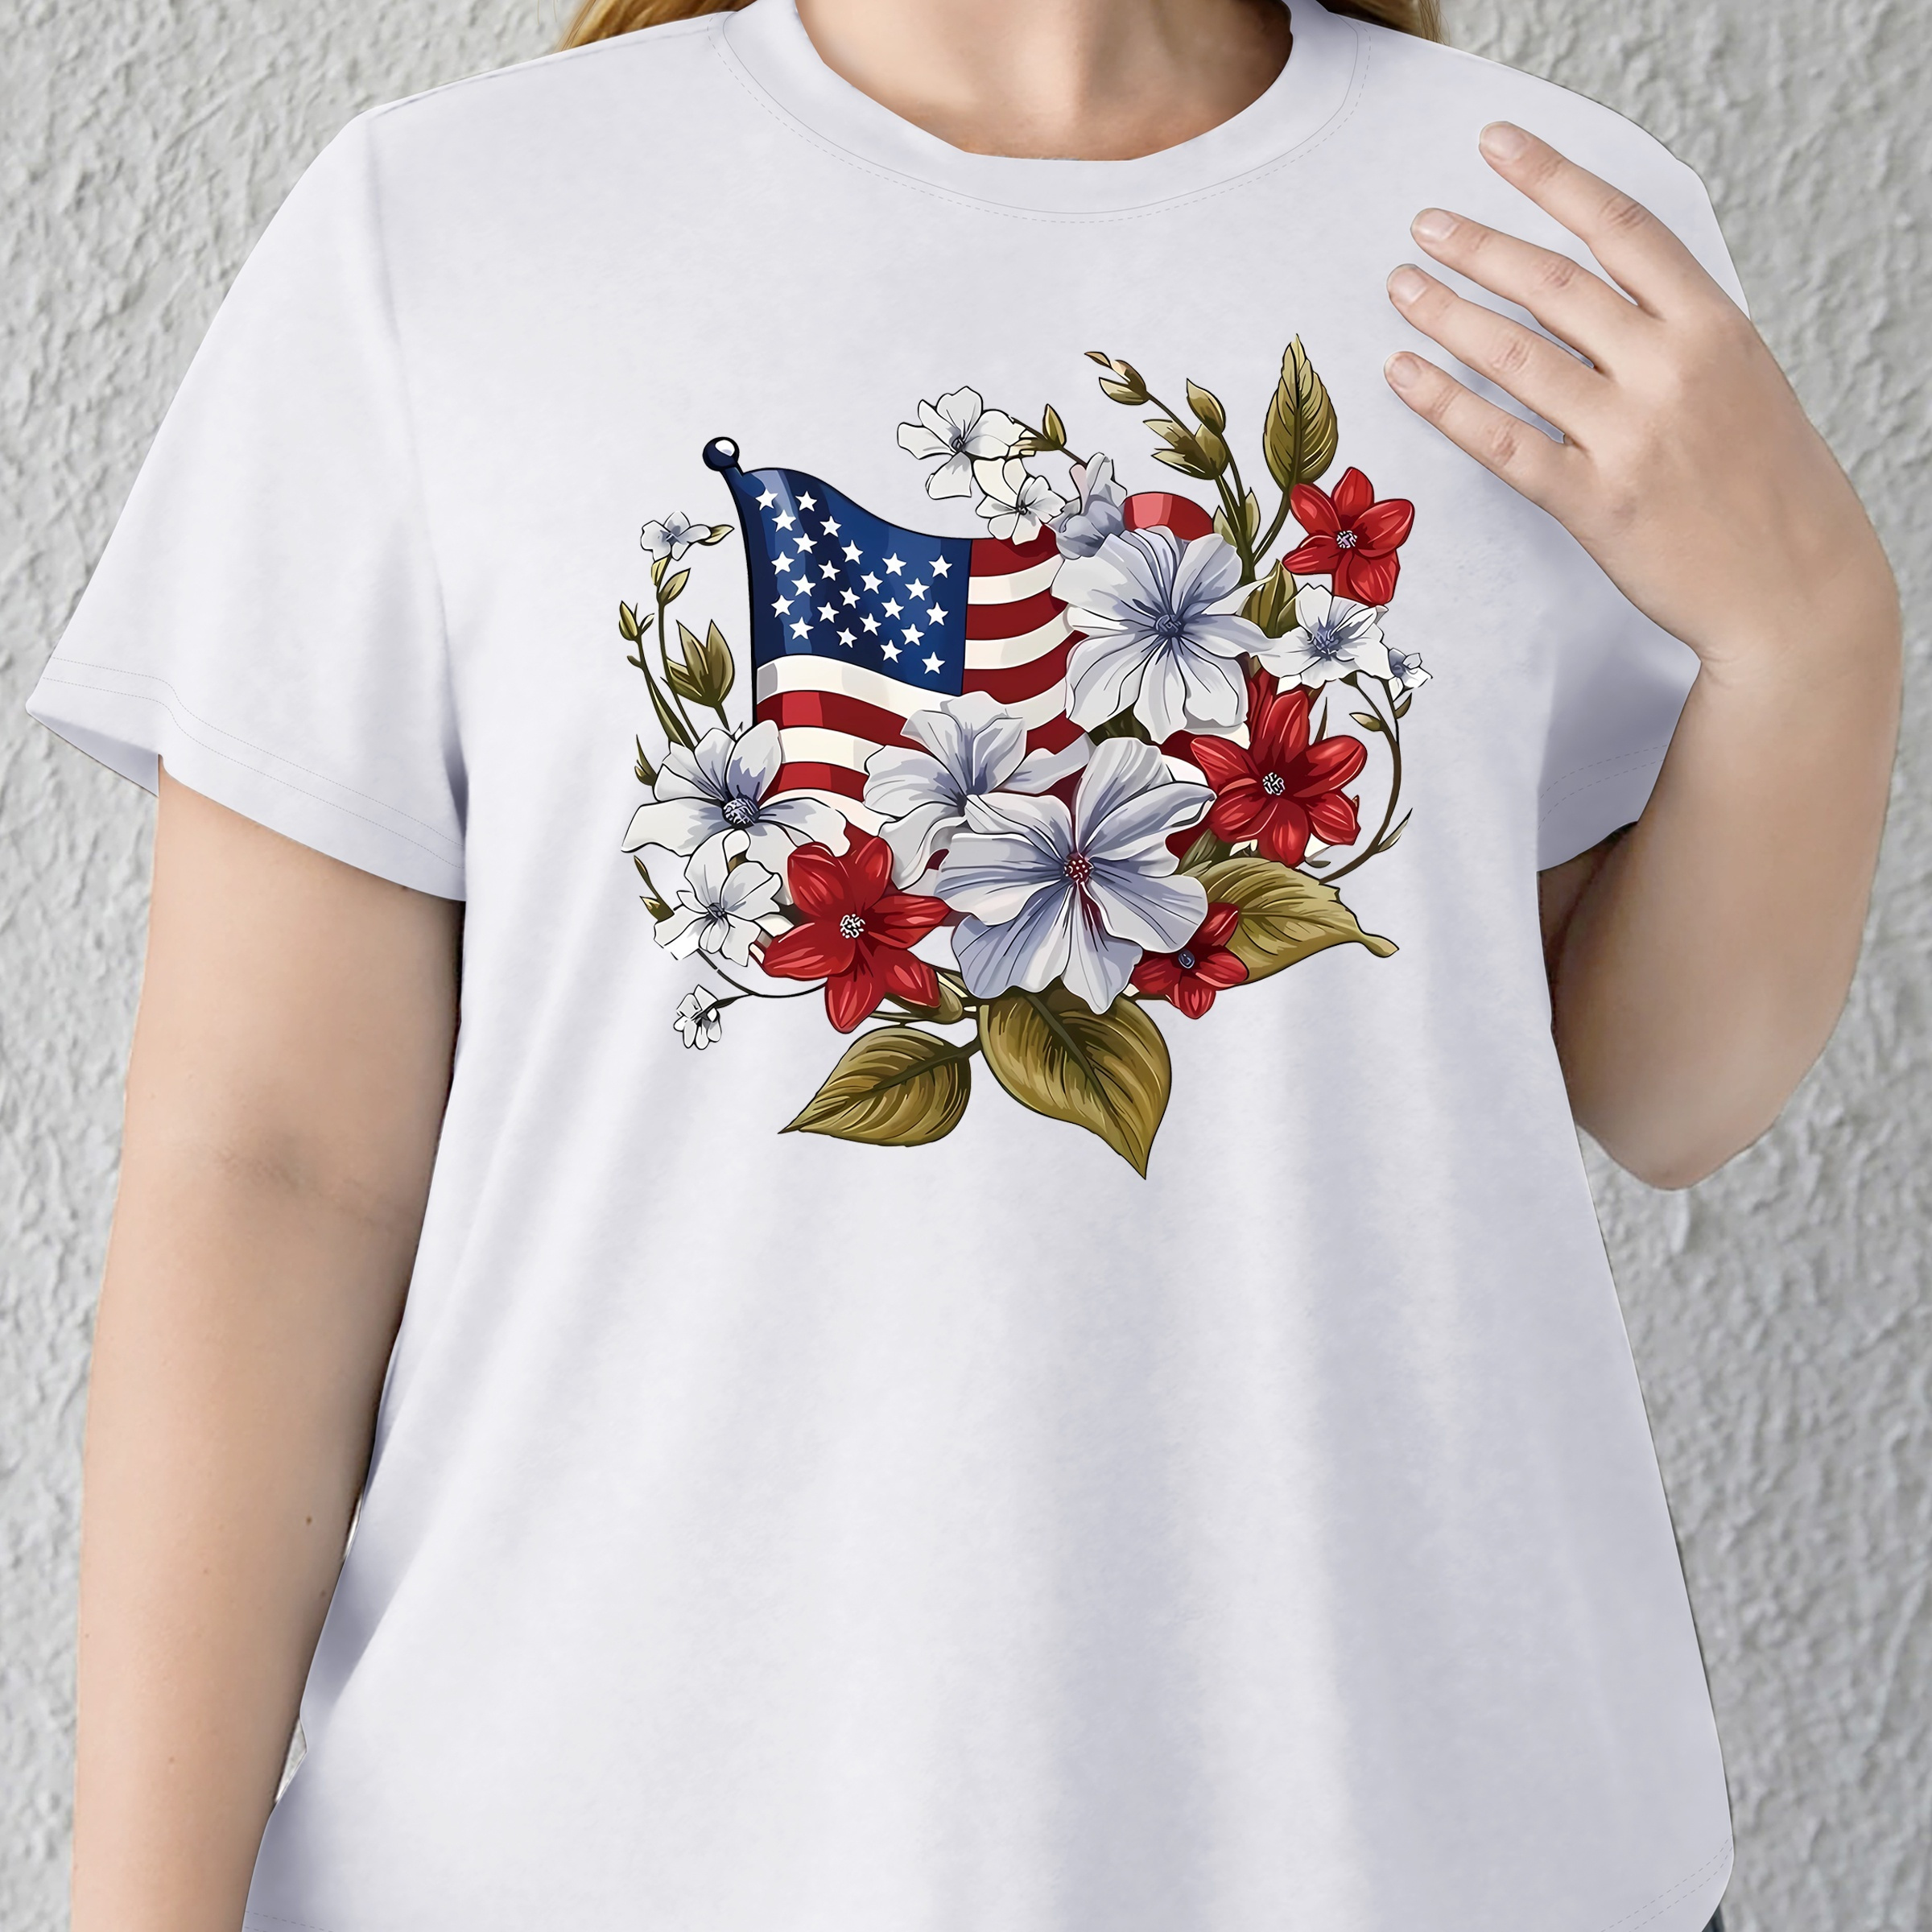 

Women's Plus Size Casual Sporty T-shirt, American Flag And Floral Print, Independence Day Outfit 4th Of July Comfort Fit Short Sleeve Tee, Fashion Breathable Casual Top